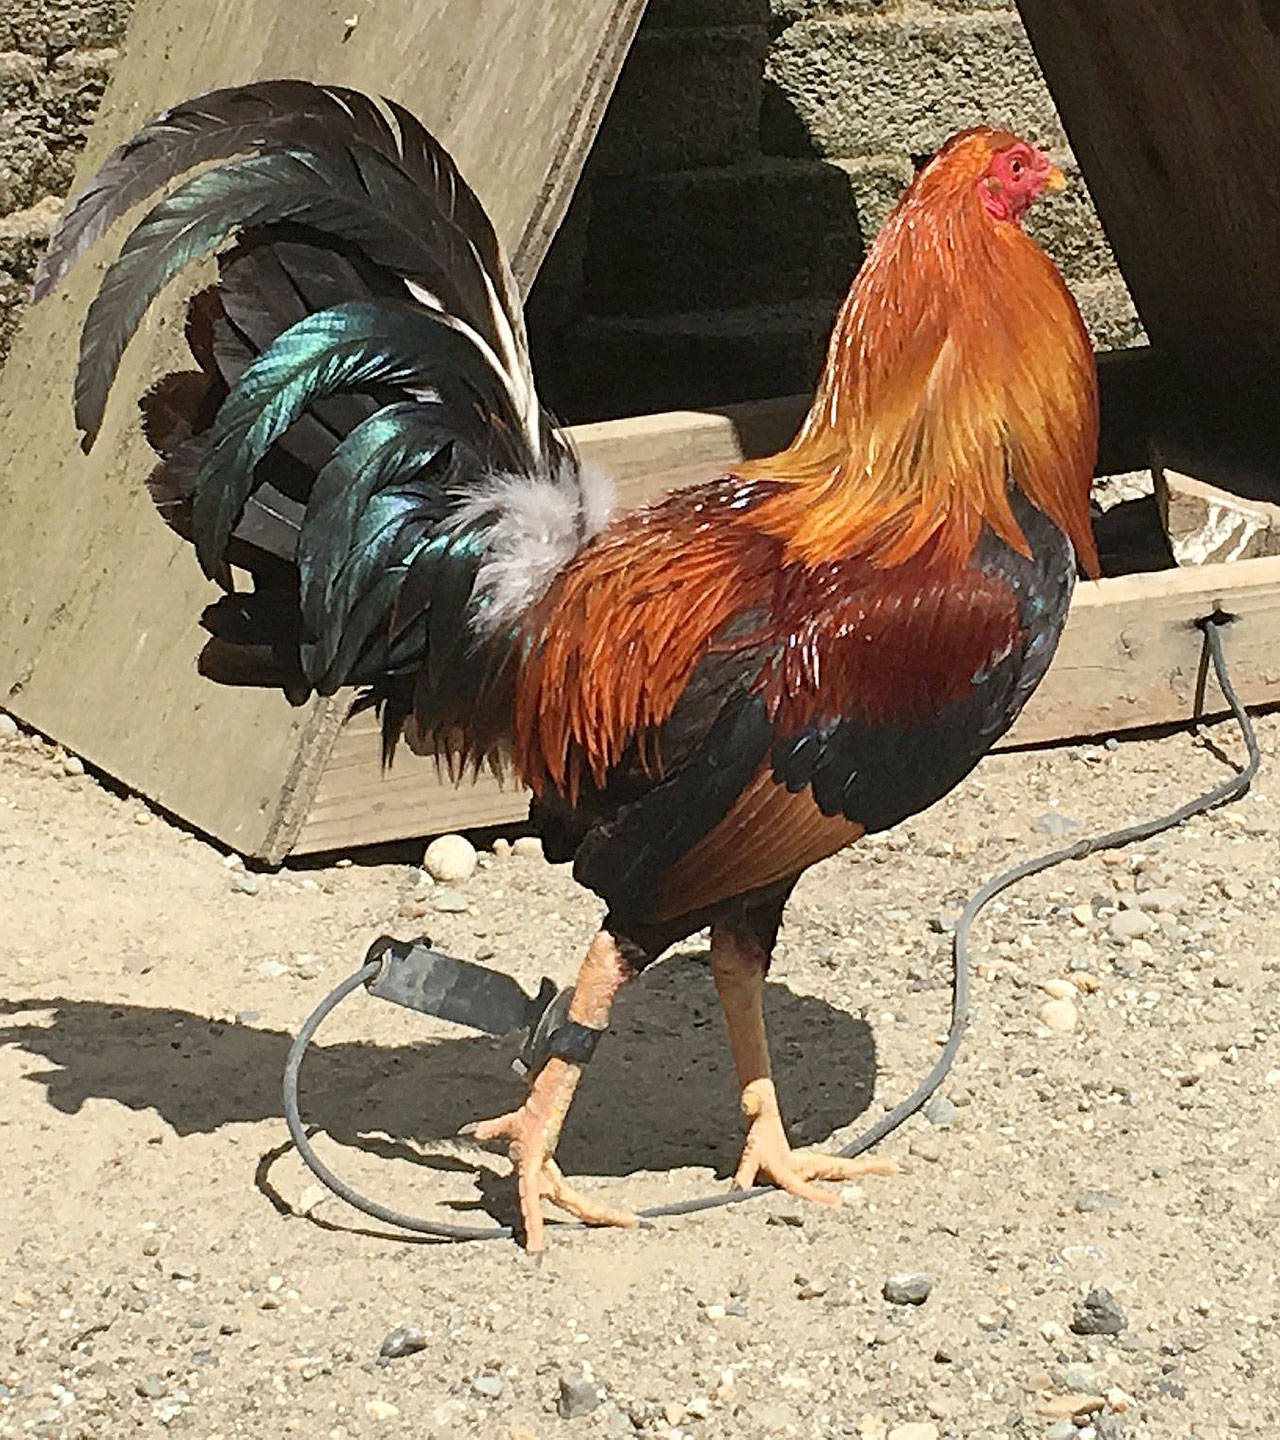 Three hundred birds, including fighting roosters like the one pictured above, were retrieved and euthanized June 2 at the site of the South Kitsap cockfighting operation by animal control staffers. (Kitsap County Sheriff’s Office photo)